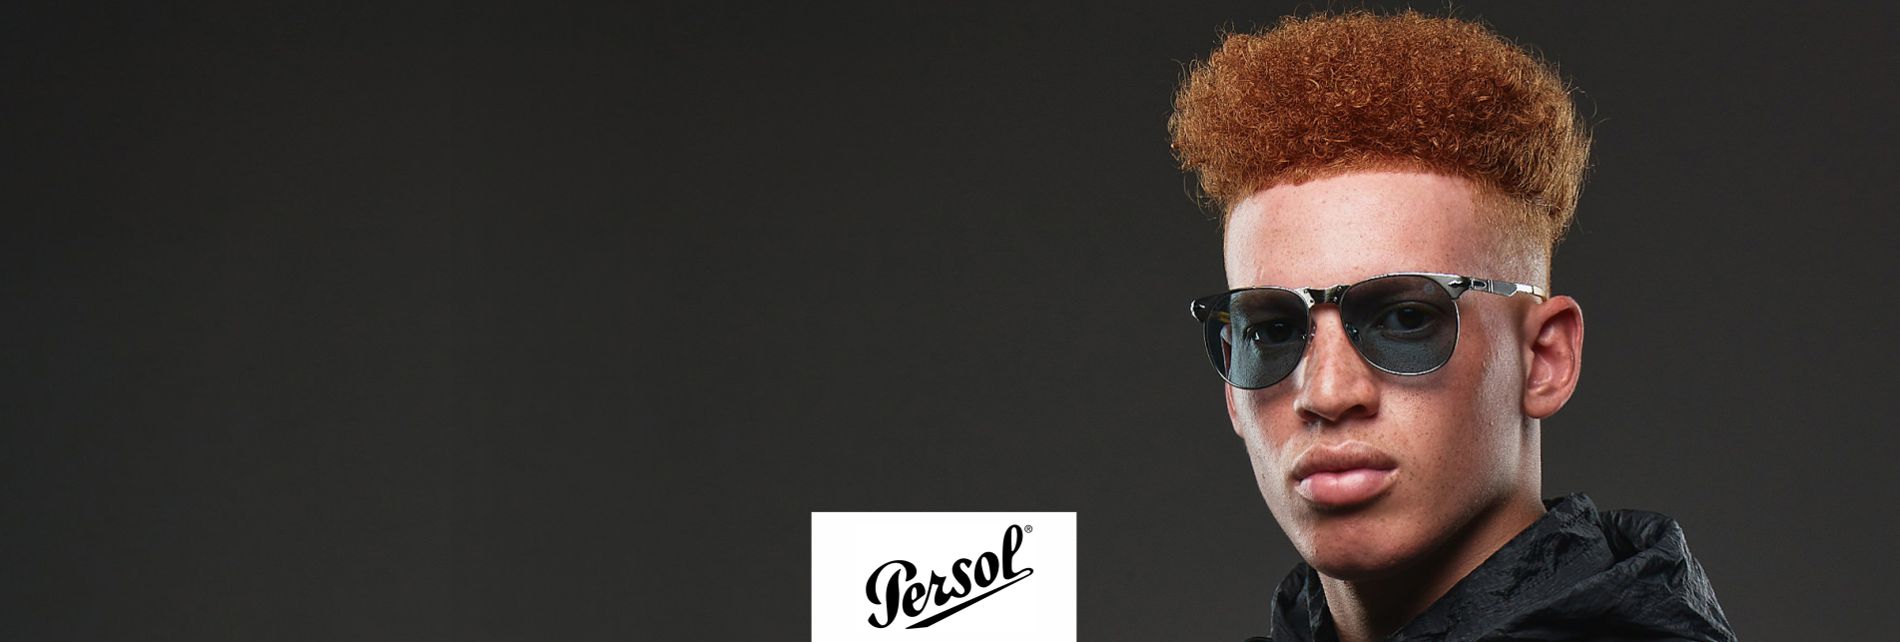 PERSOL EXCLUSIVE